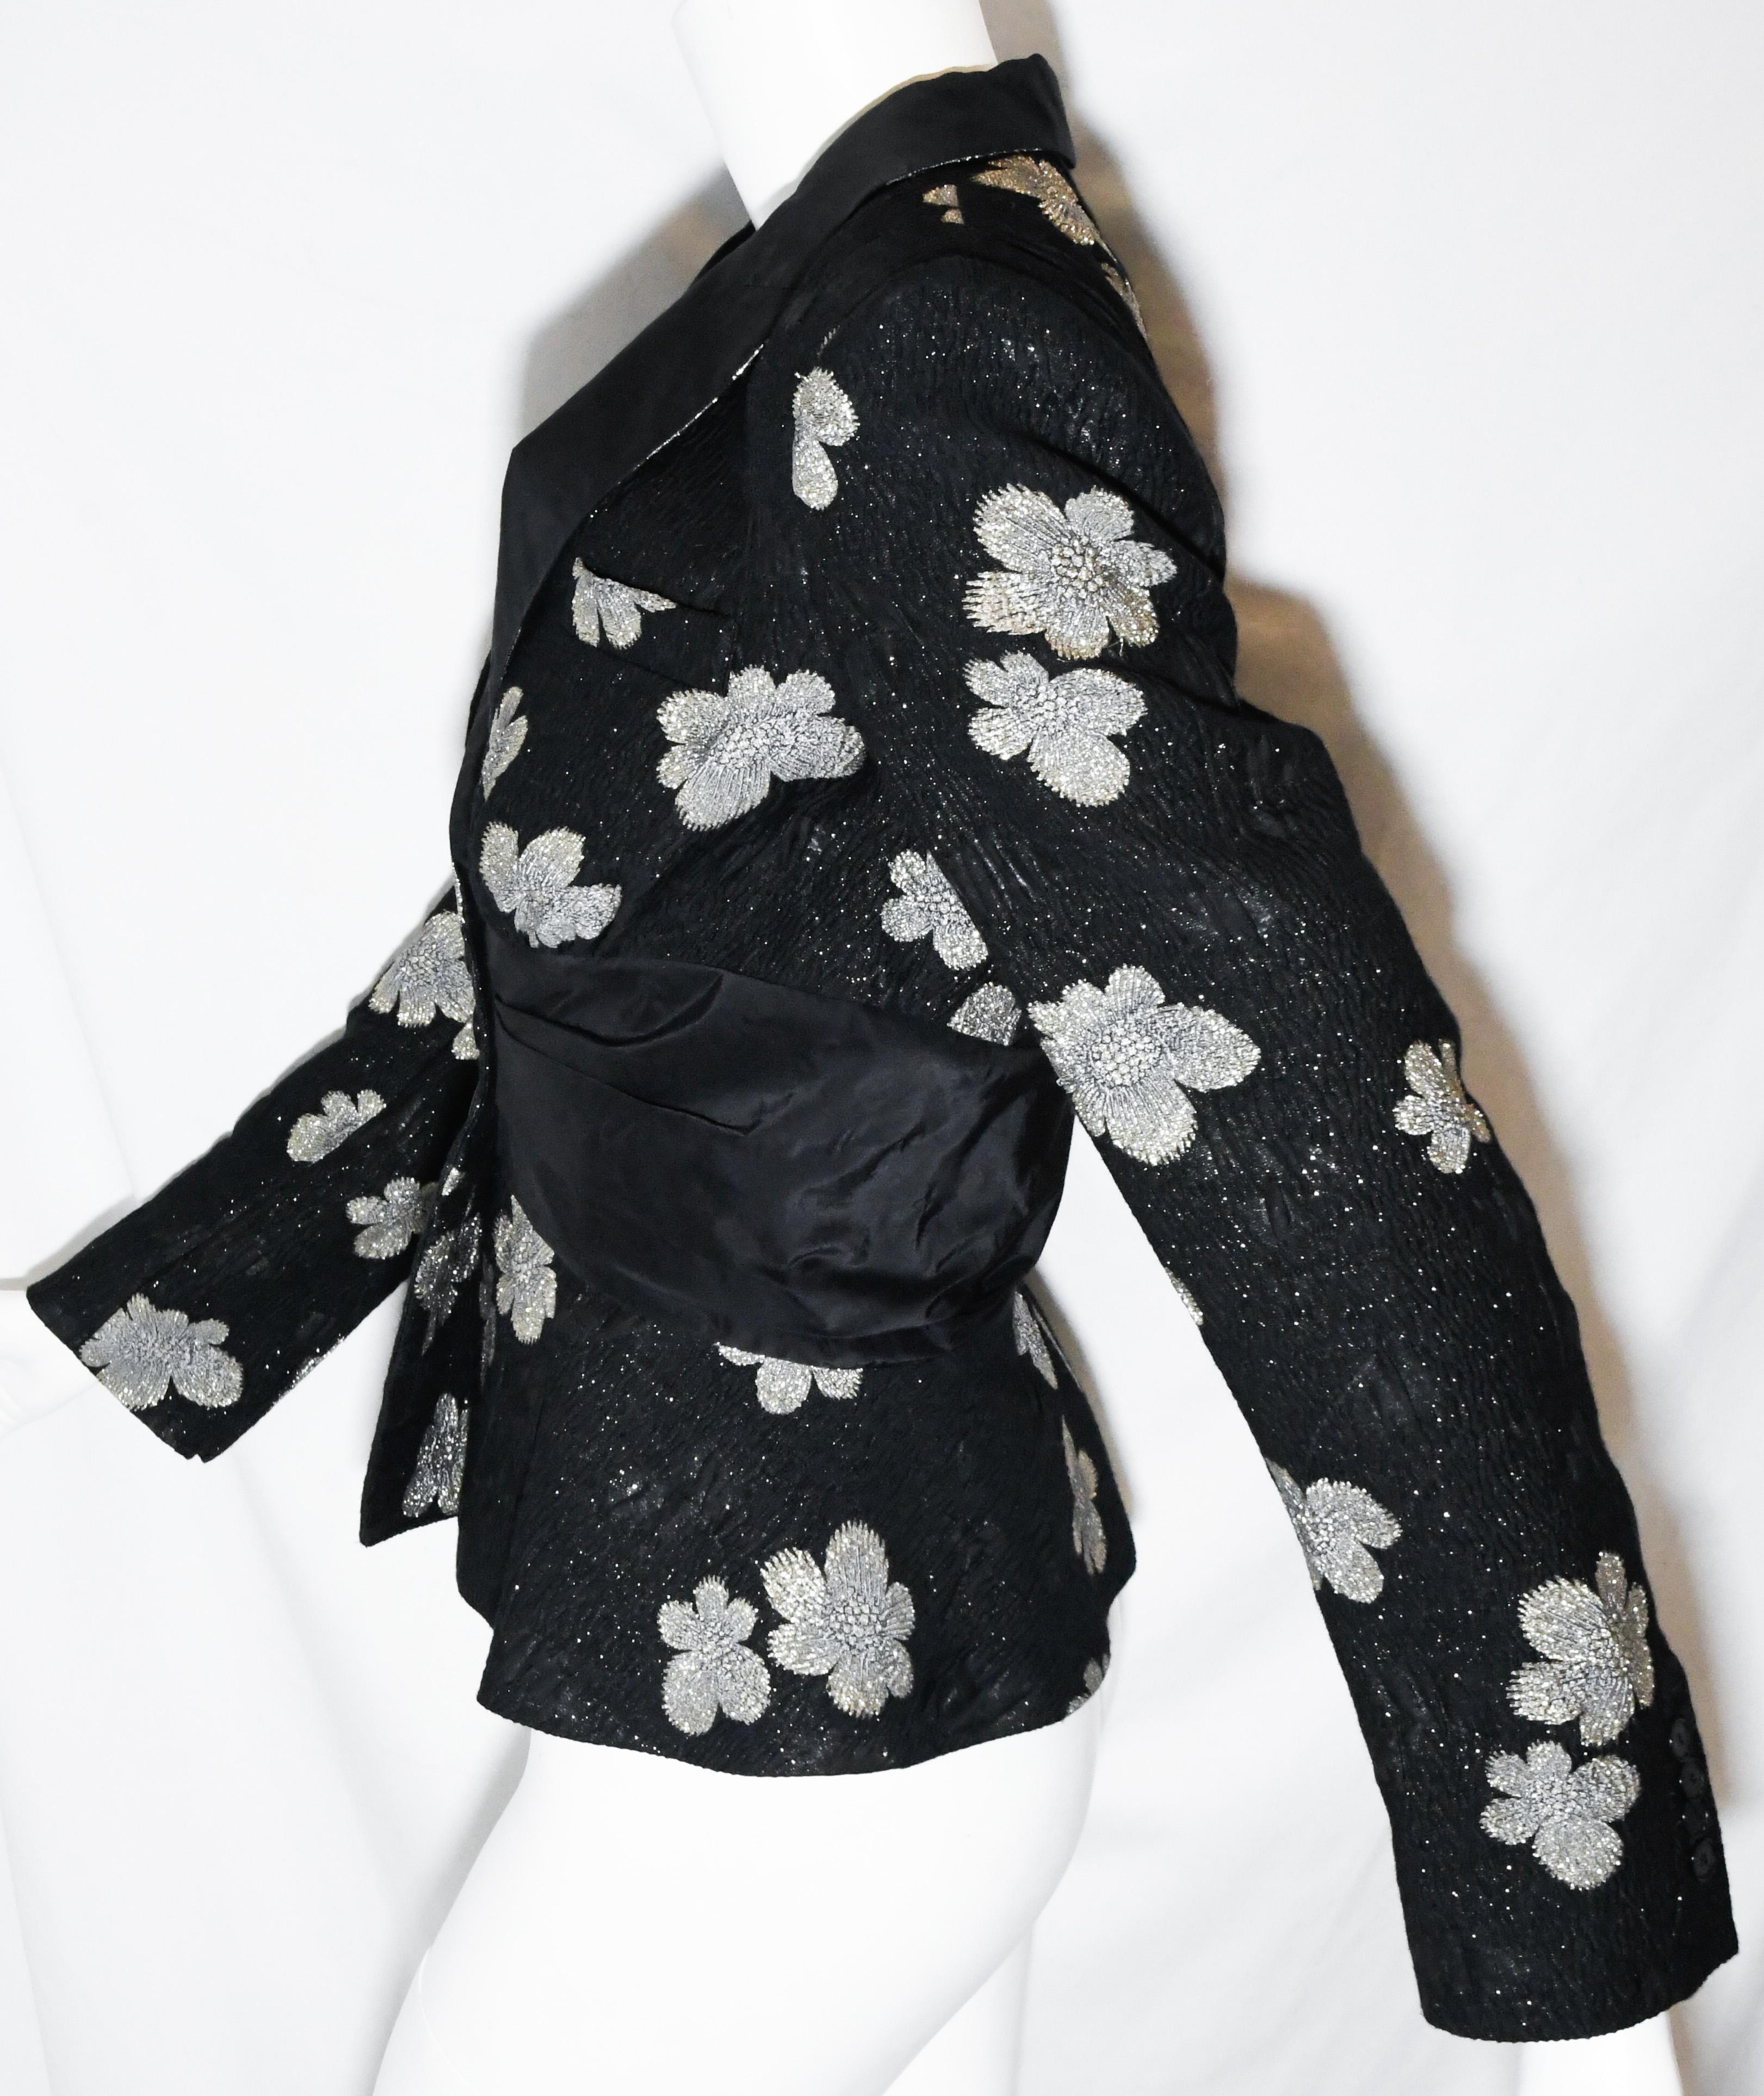 Etro black jacket decorated with silver thread flowers throughout.  This shawl lapel jacket does not contain the silver thread flowers and includes a pleated cinched waist.  Jacket is lined in black silk.  Two buttons at waist for closure.  Jacket